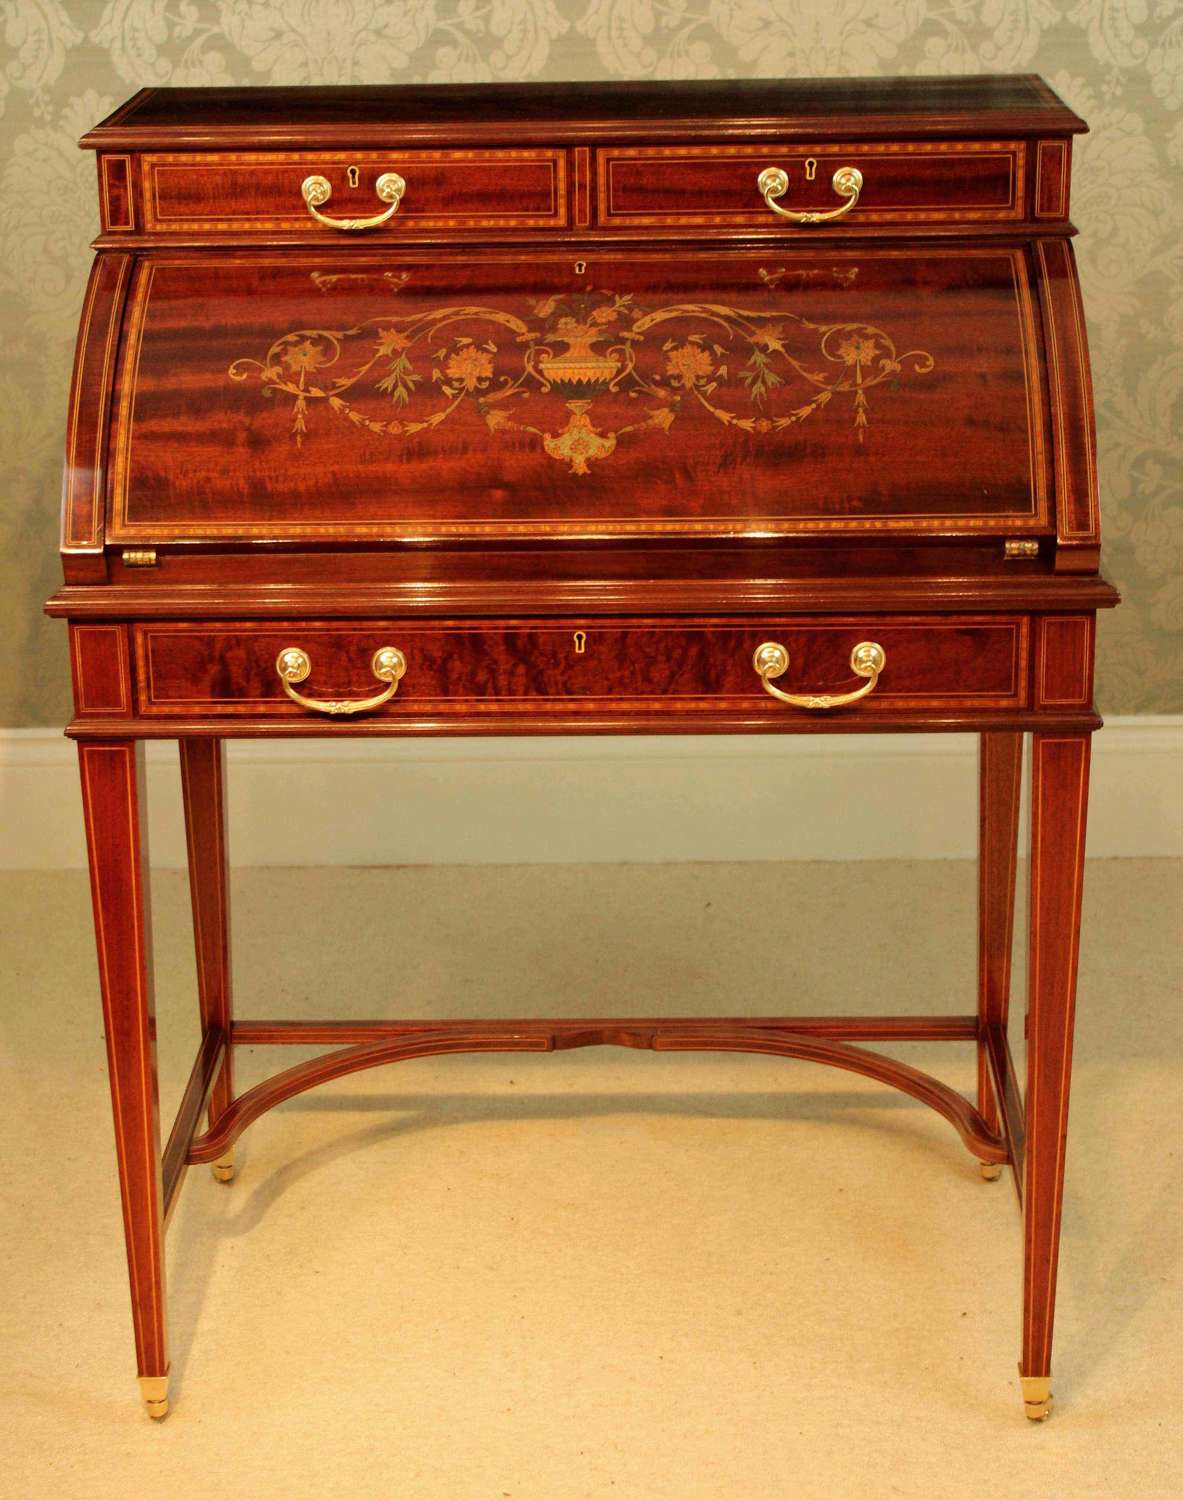 A Beautiful Late Victorian Mahogany cylinder desk by Maple & Co.